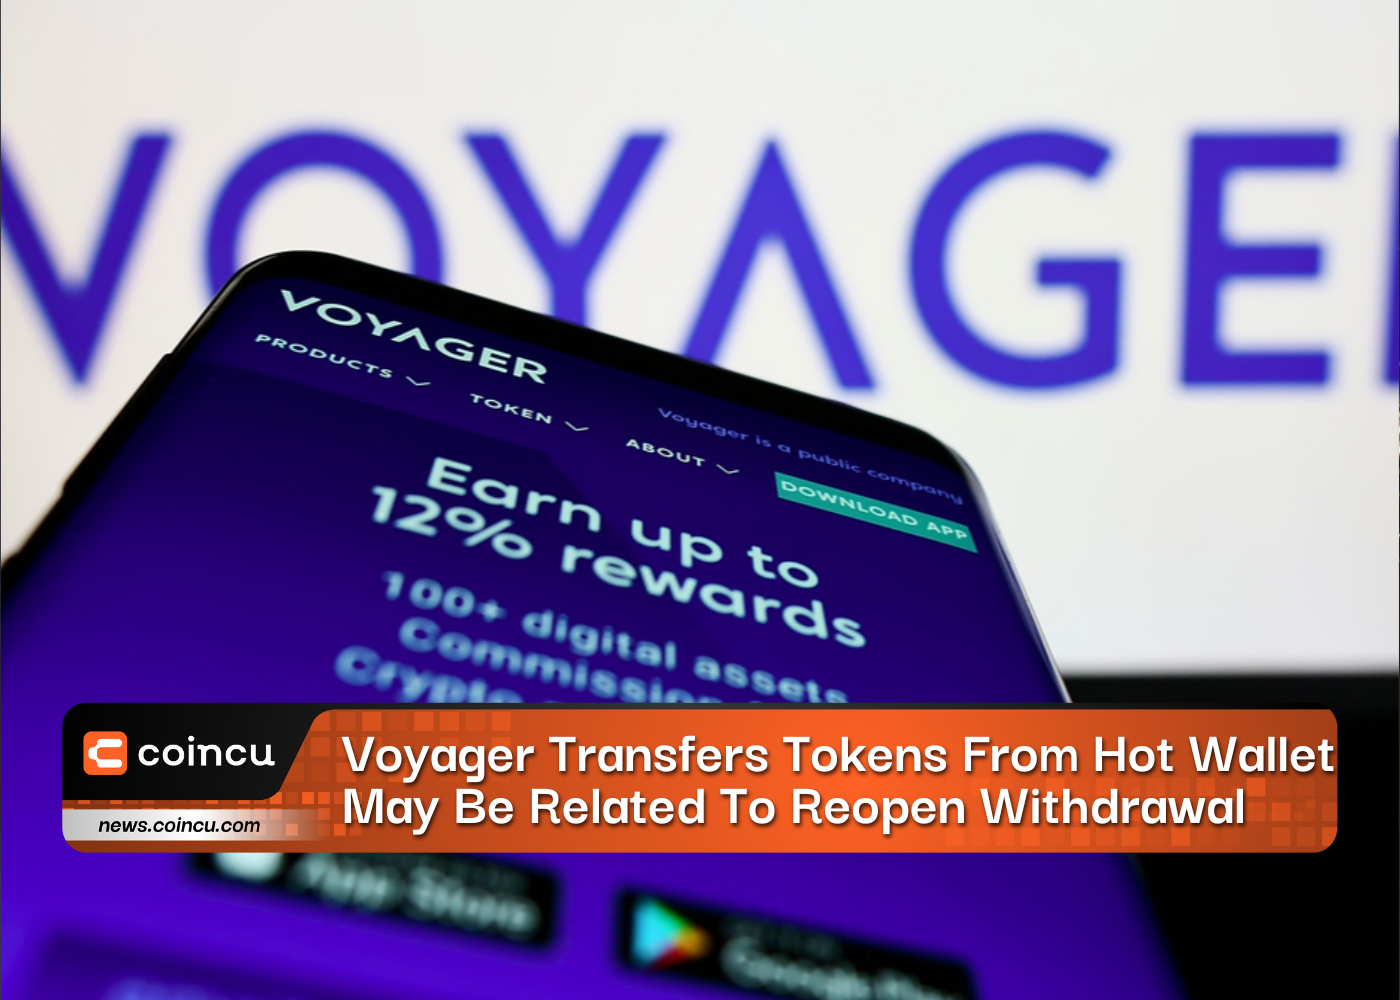 Voyager Transfers Tokens From Hot Wallet May Be Related To Reopen Withdrawal